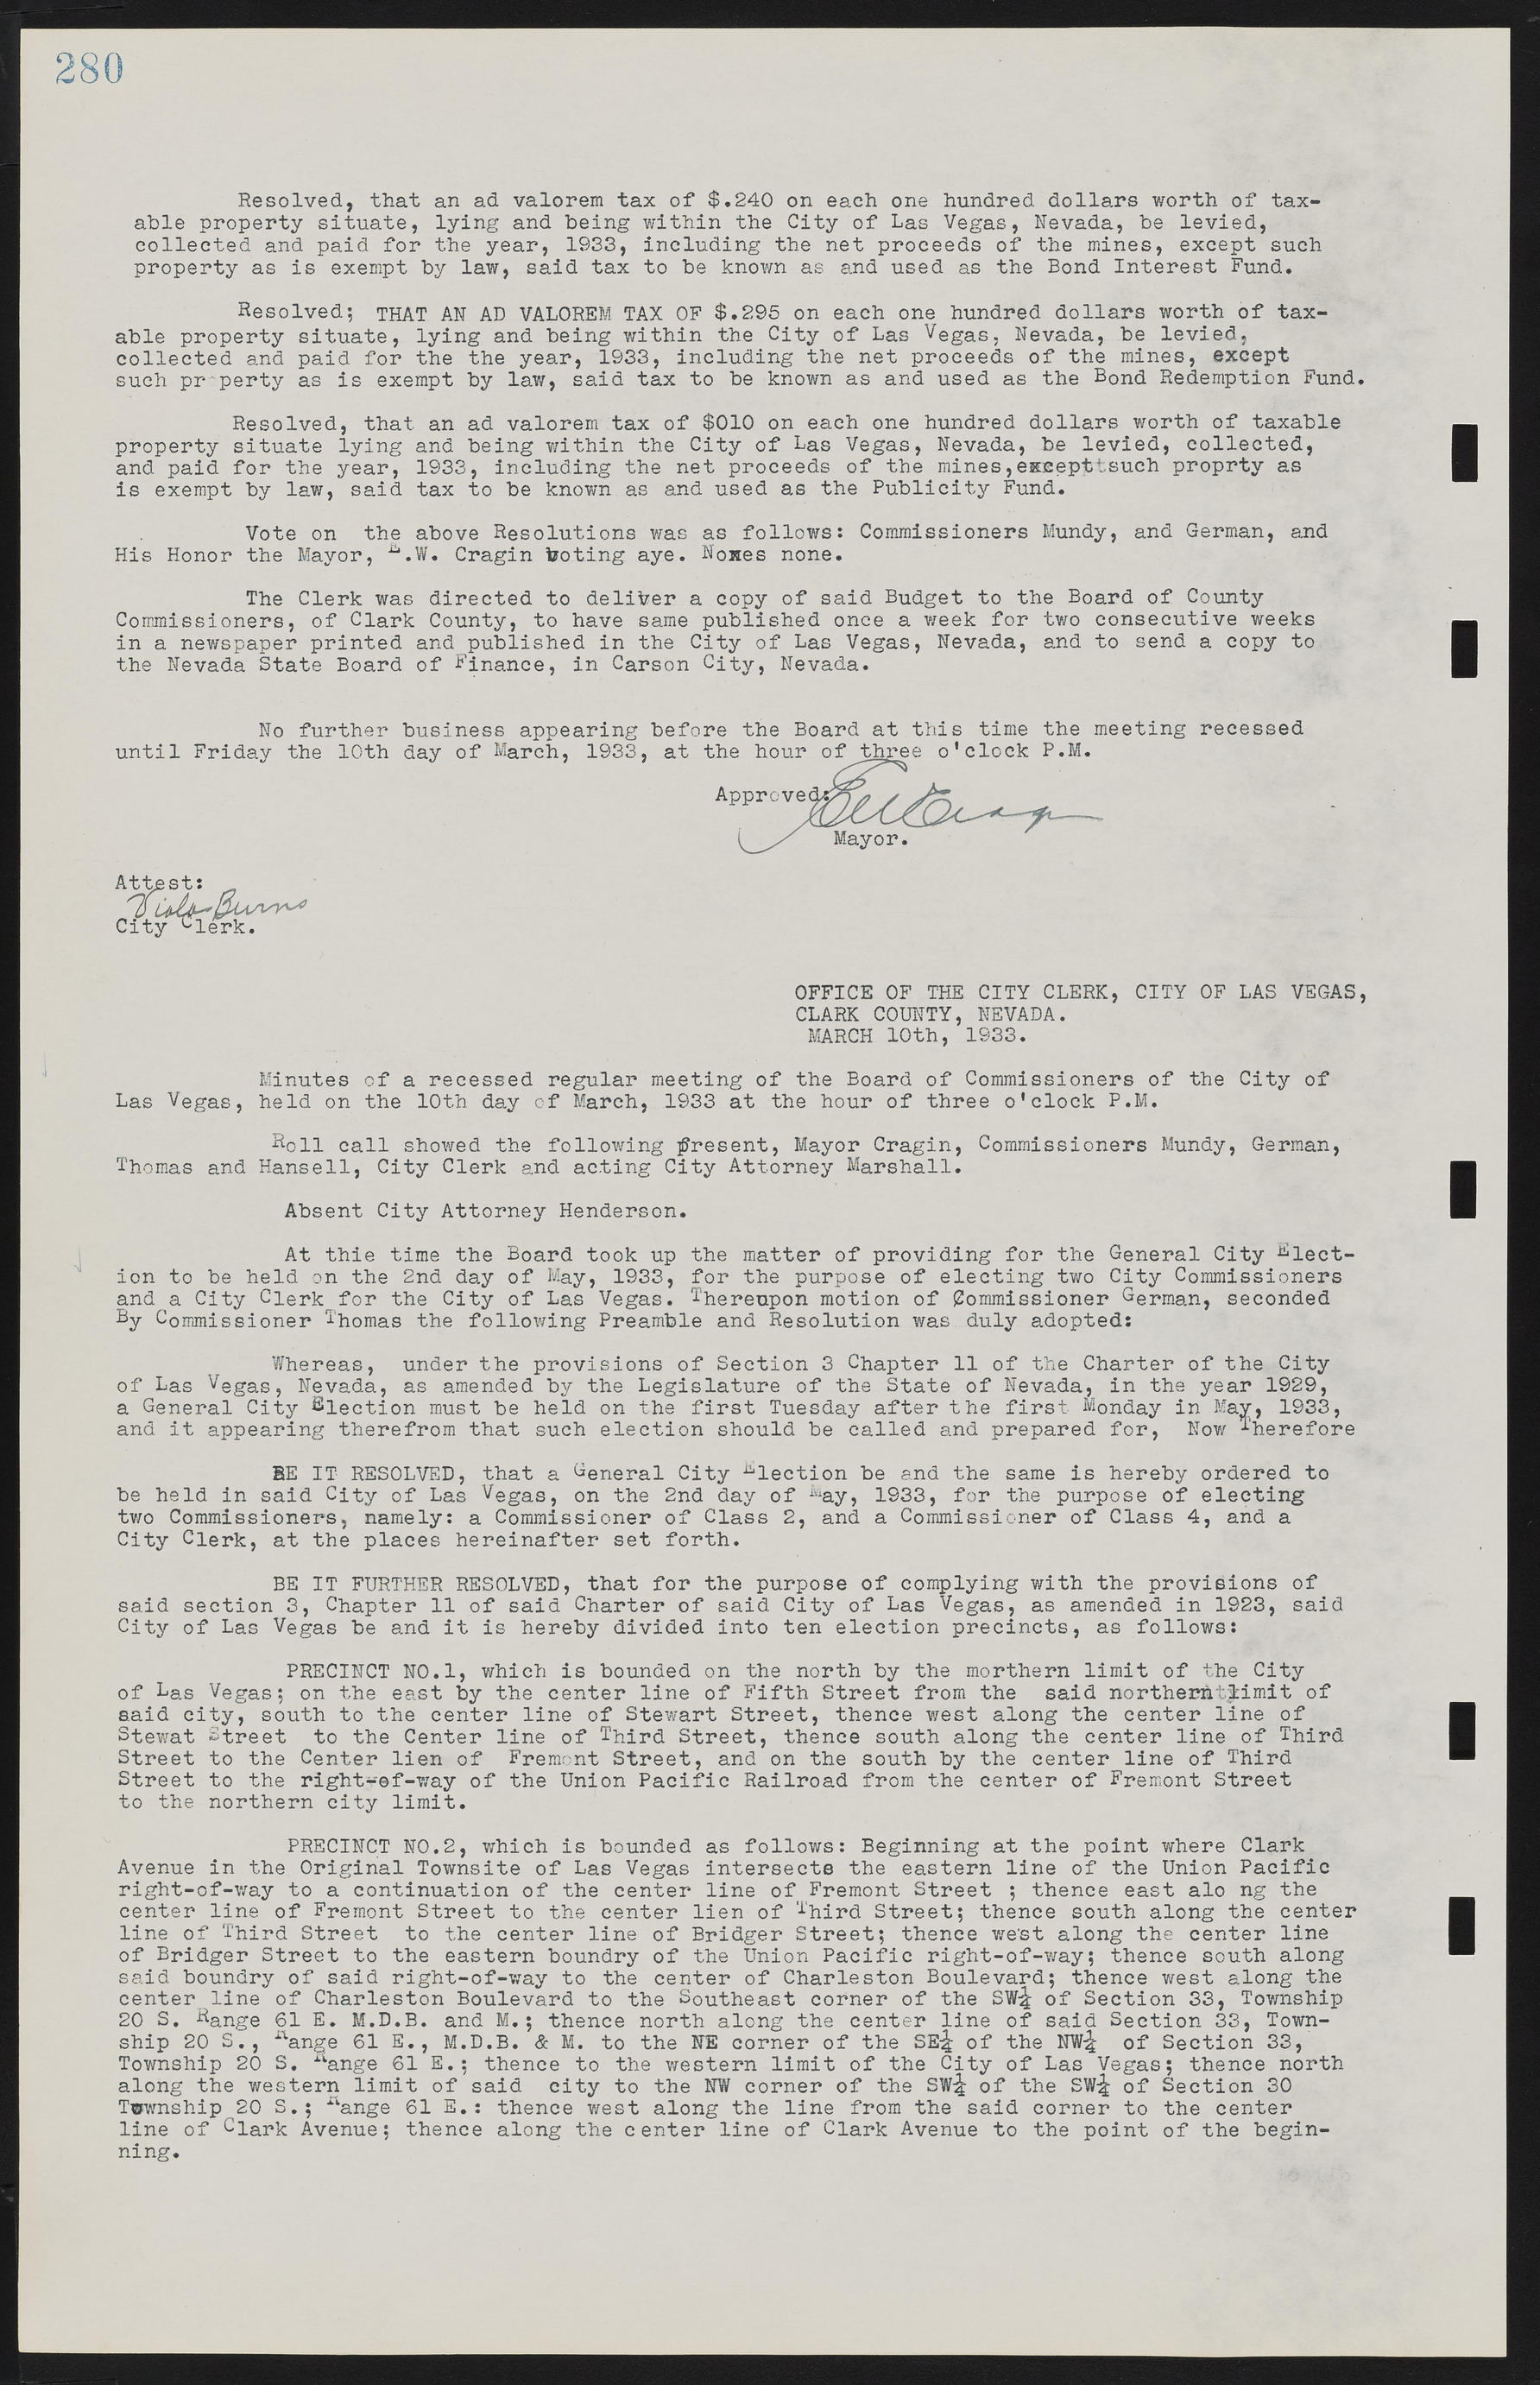 Las Vegas City Commission Minutes, May 14, 1929 to February 11, 1937, lvc000003-286